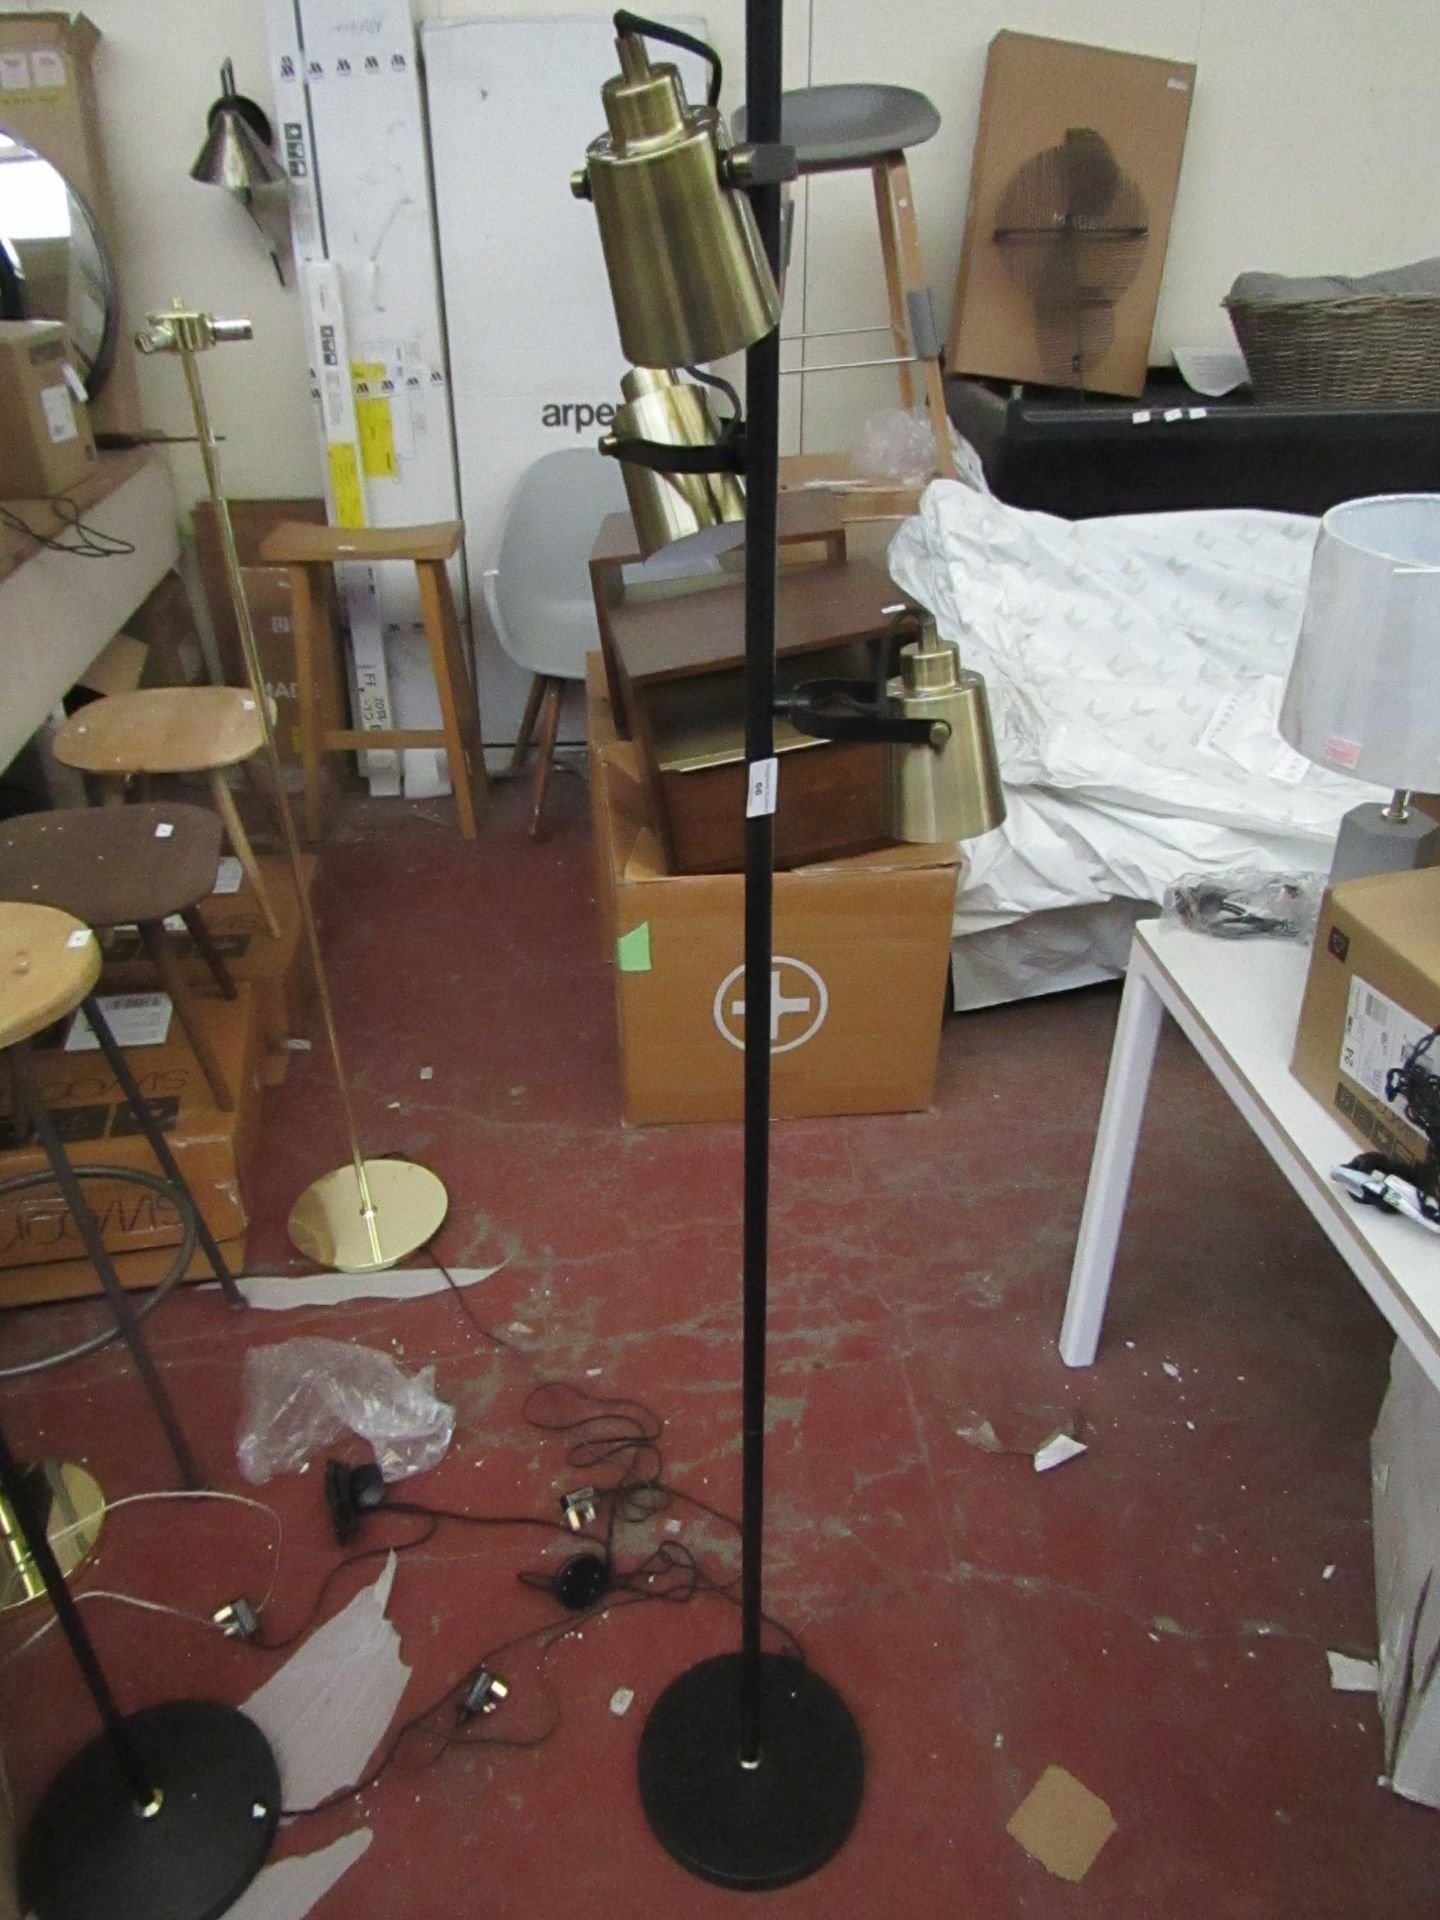 | 1X | MADE.COM SEPPO FLOOR LAMP | NO MAJOR DAMAGE, UNTESTED AND BOXED | RRP £119 |